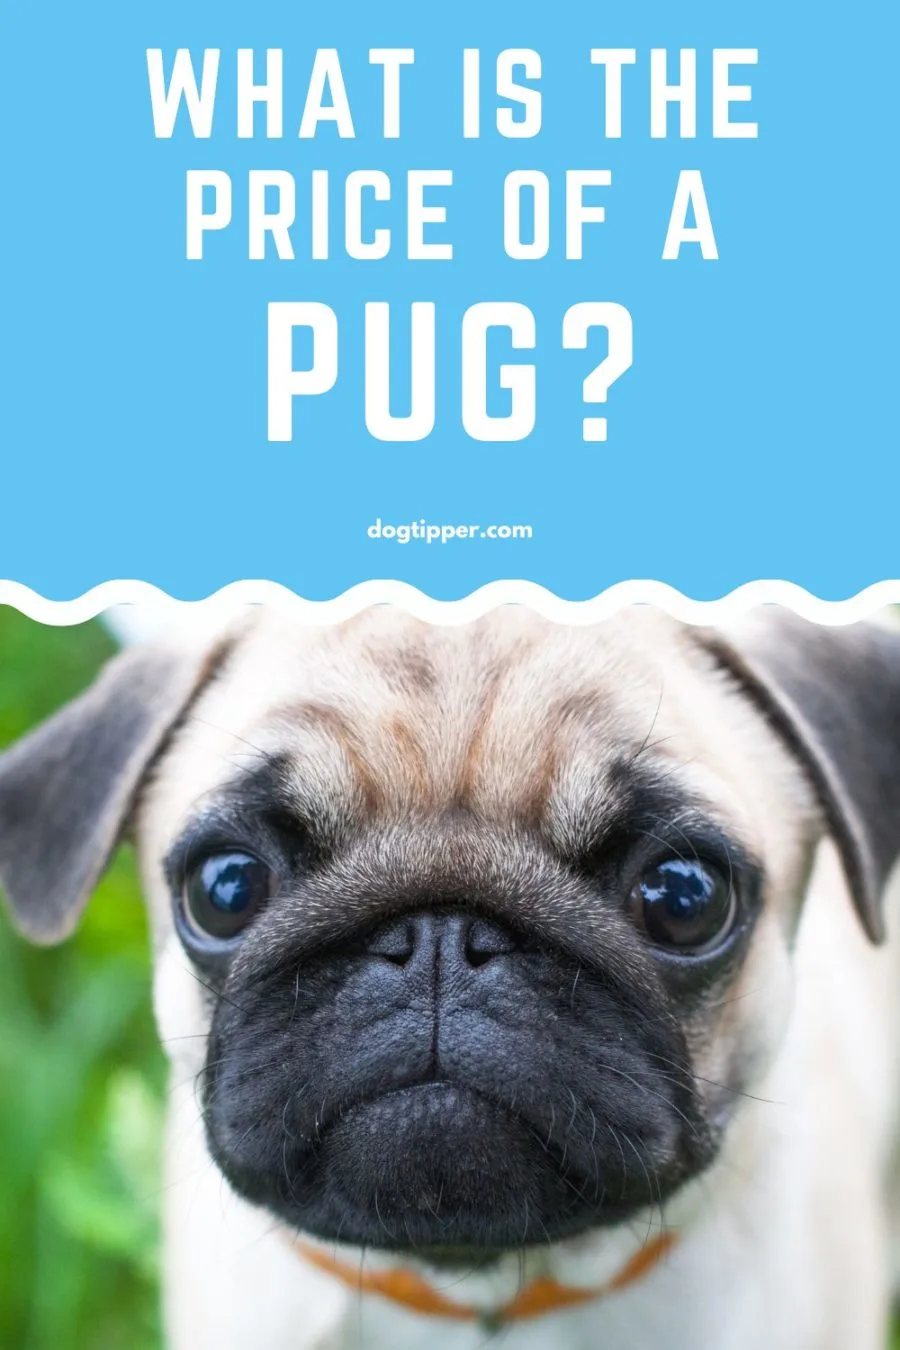 What is the Price of a Pug?